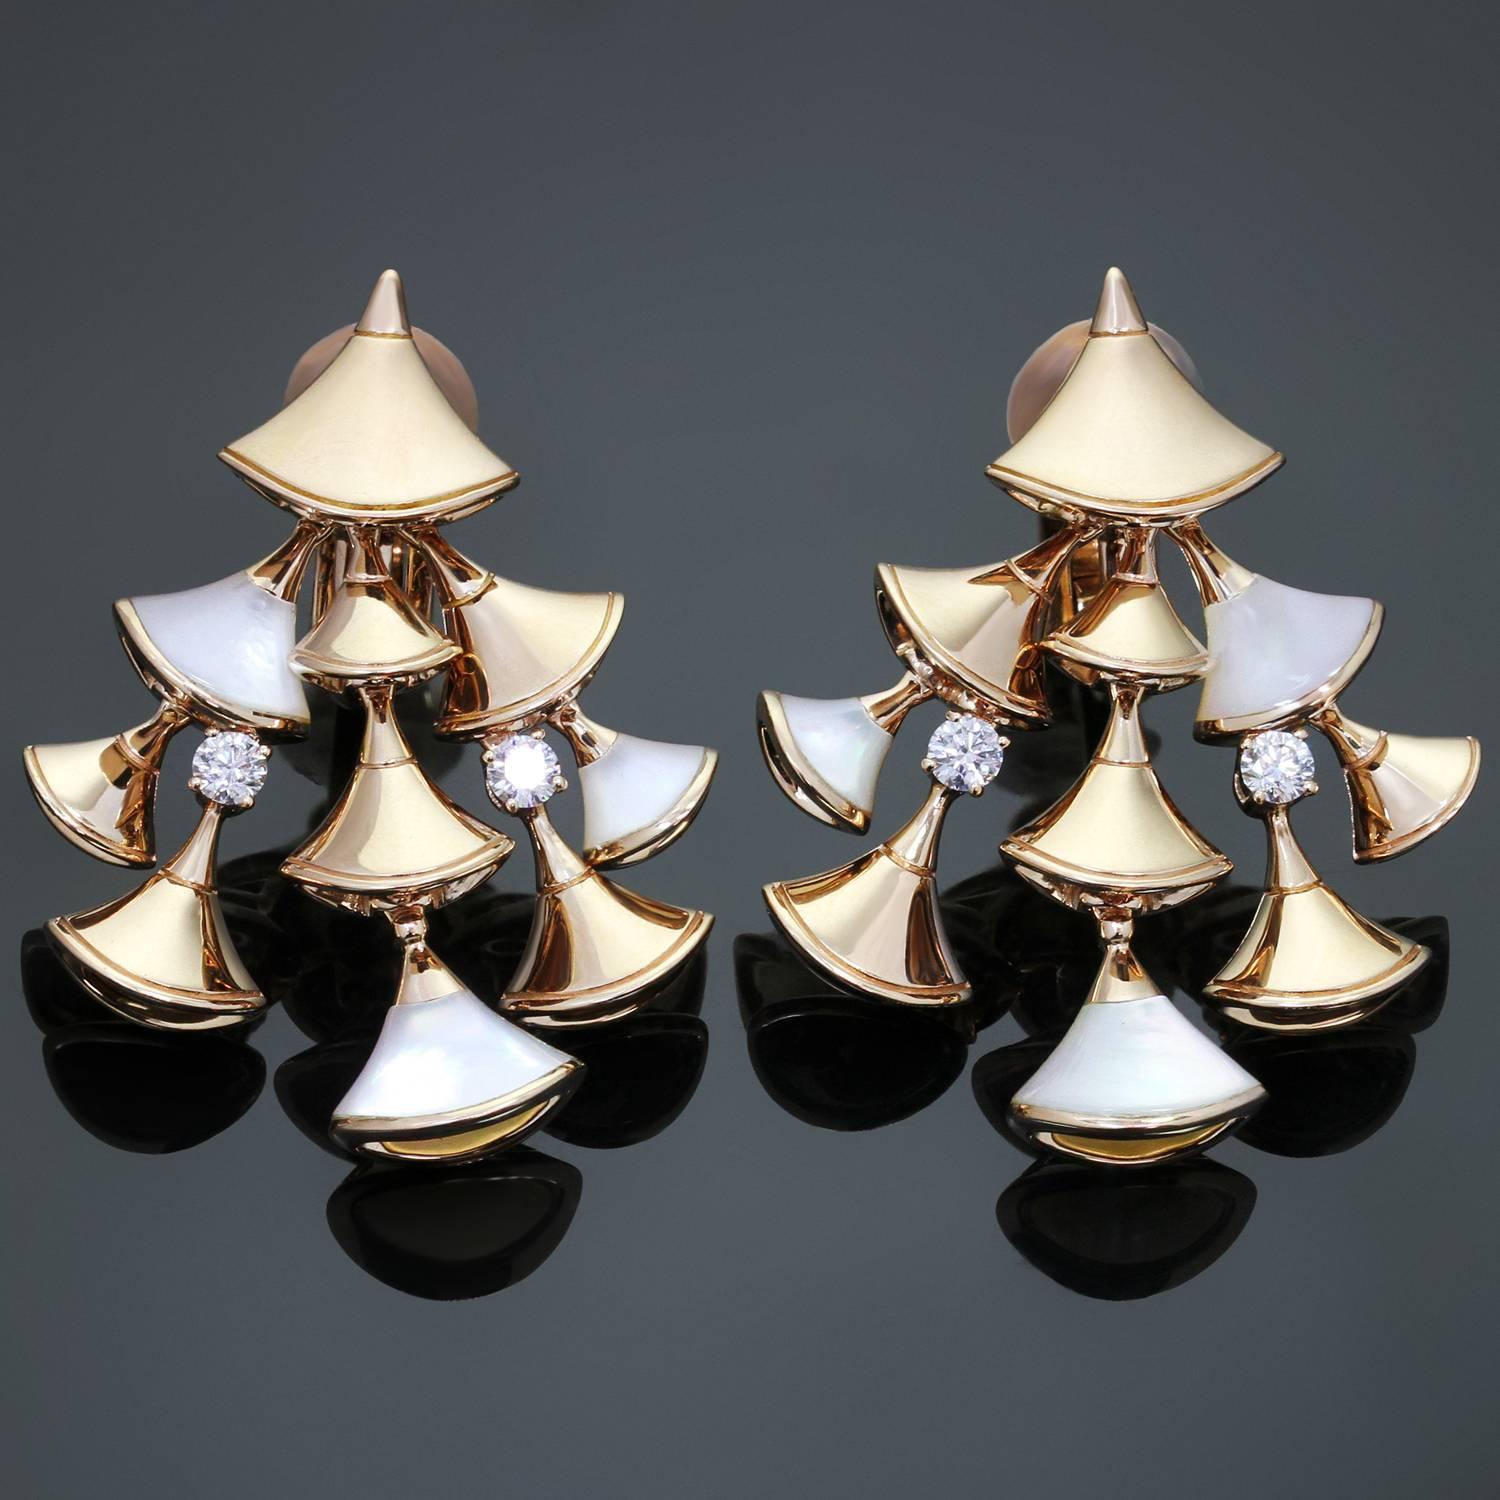 These sophisticated clip-on earring's from Bulgari's Divas' Dream collection feature a cascade of fan-shaped motifs crafted in 18k rose gold and beautifully accented with mother-of-pearl and 4 sparkling brilliant-cut round diamonds. The classic